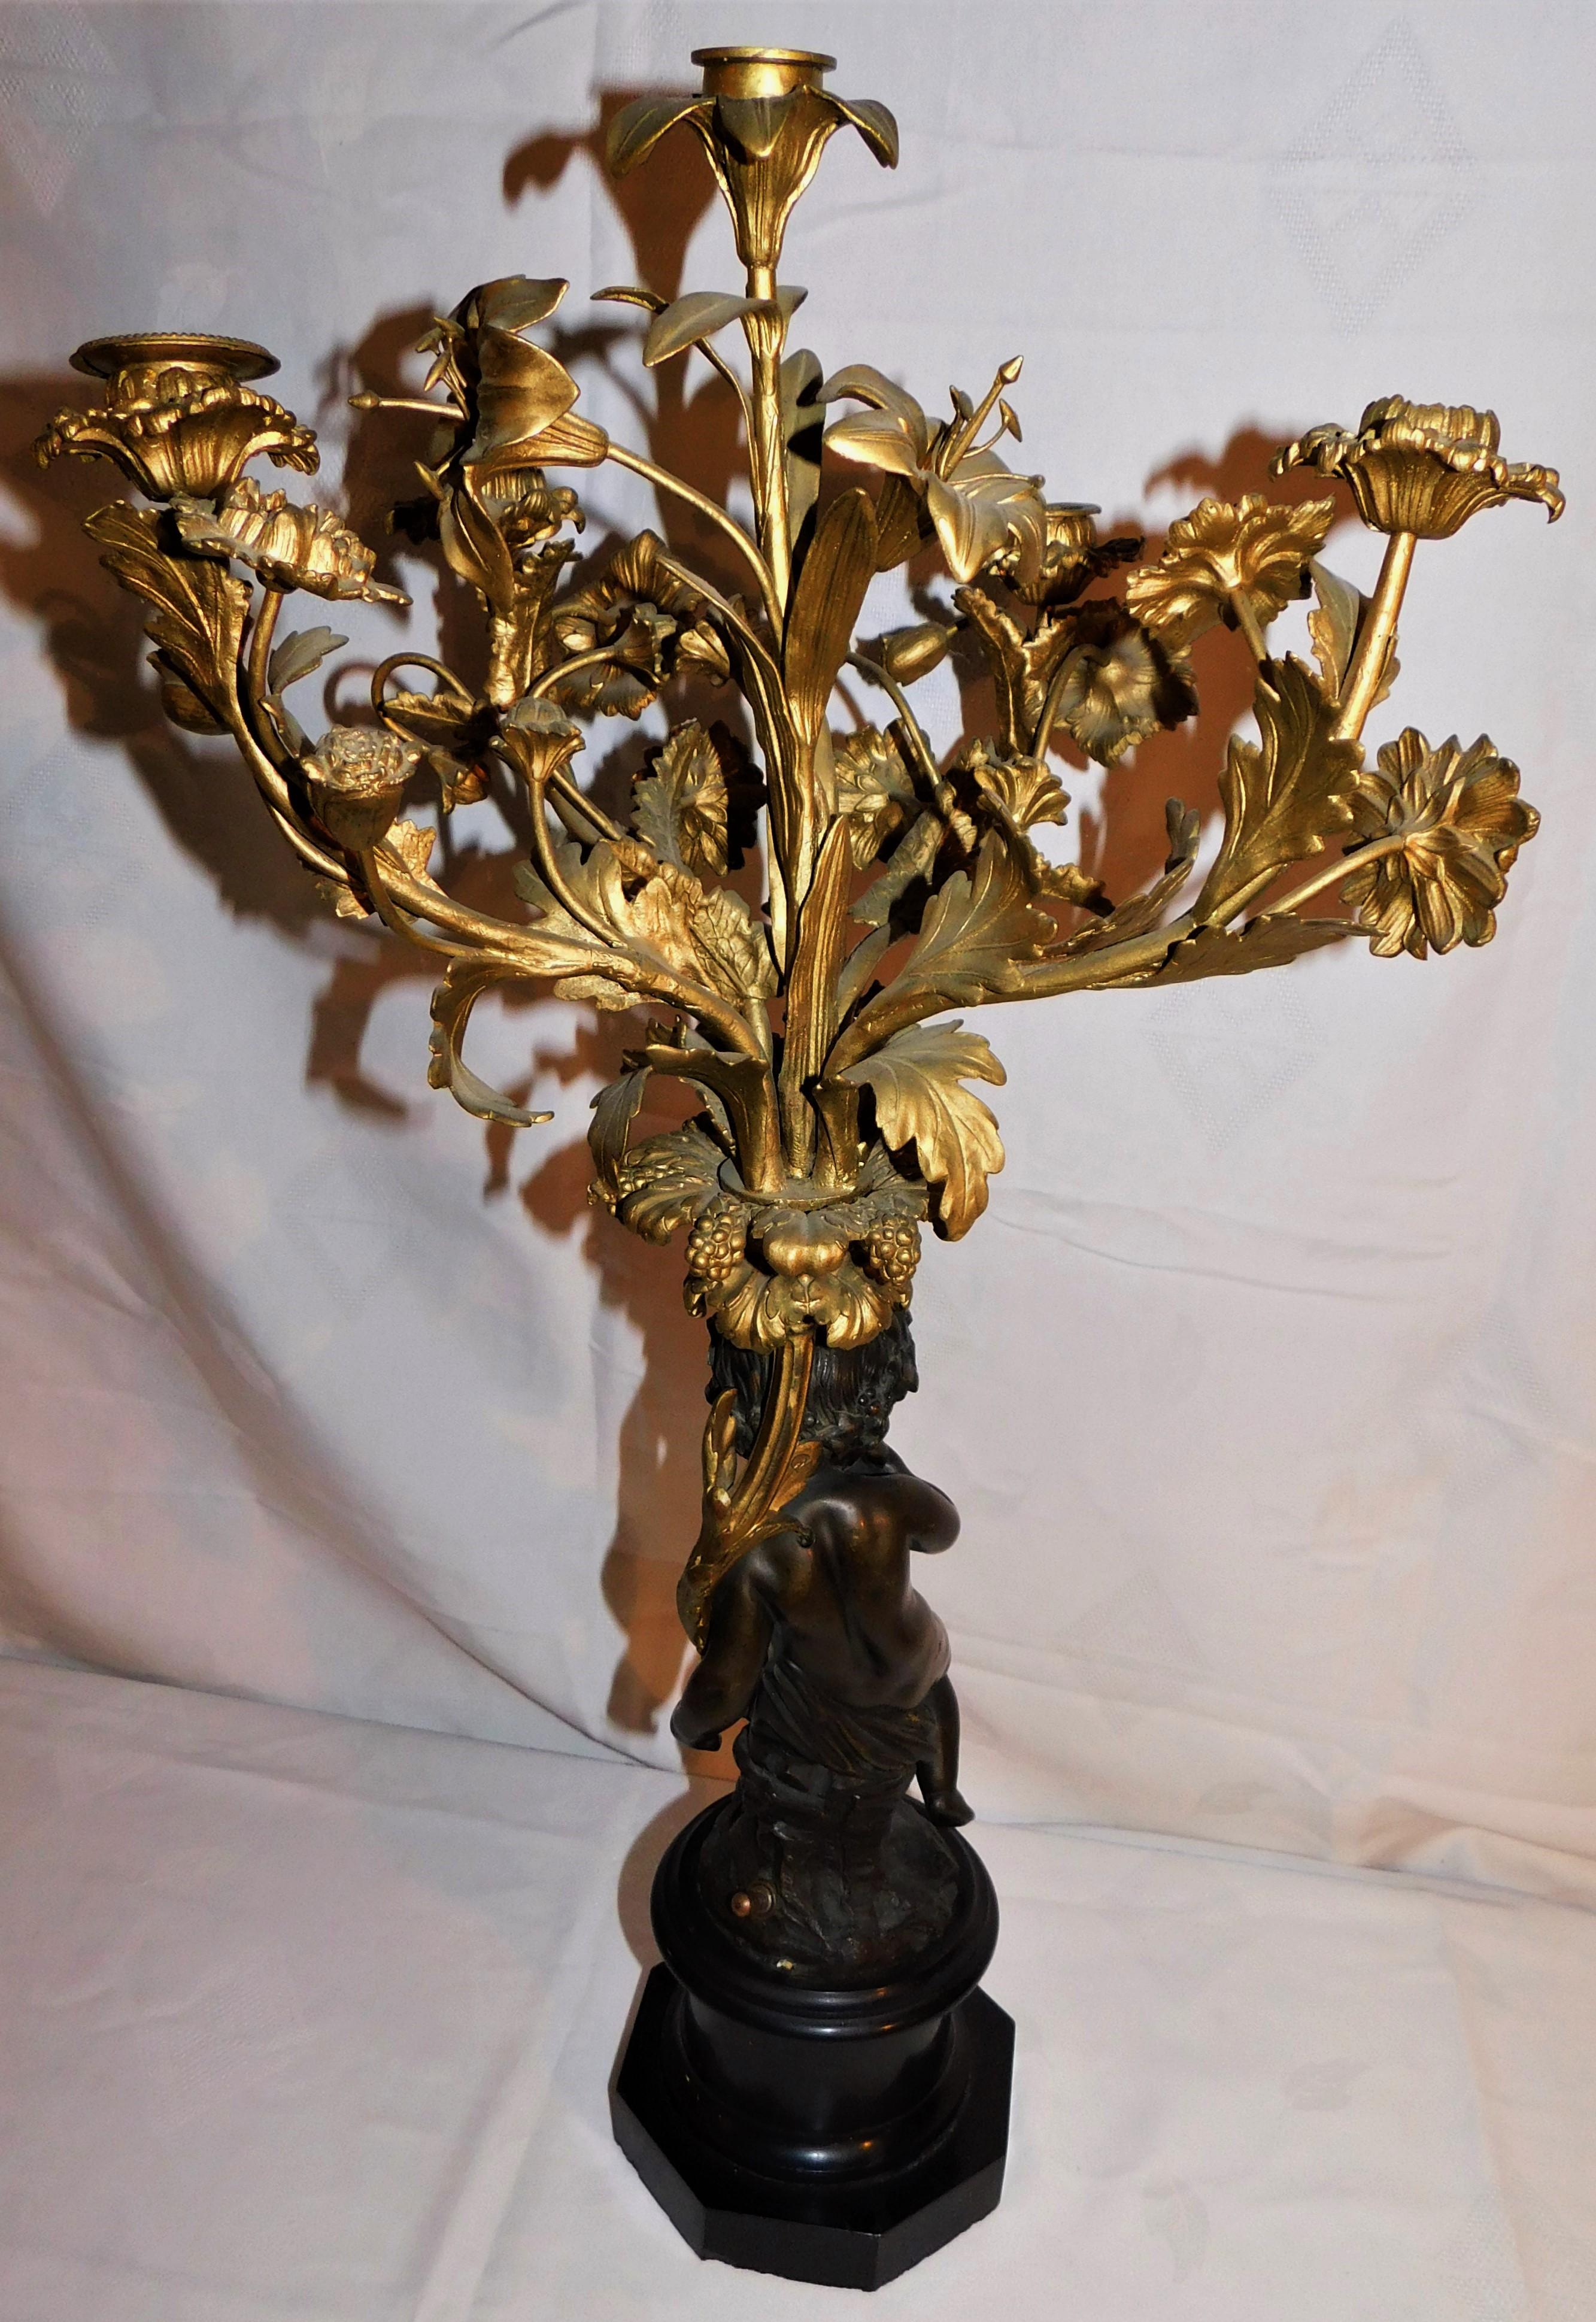 Pair of 19th Century French Gold Gilded Bronze Putti Cherubs Candelabras For Sale 3